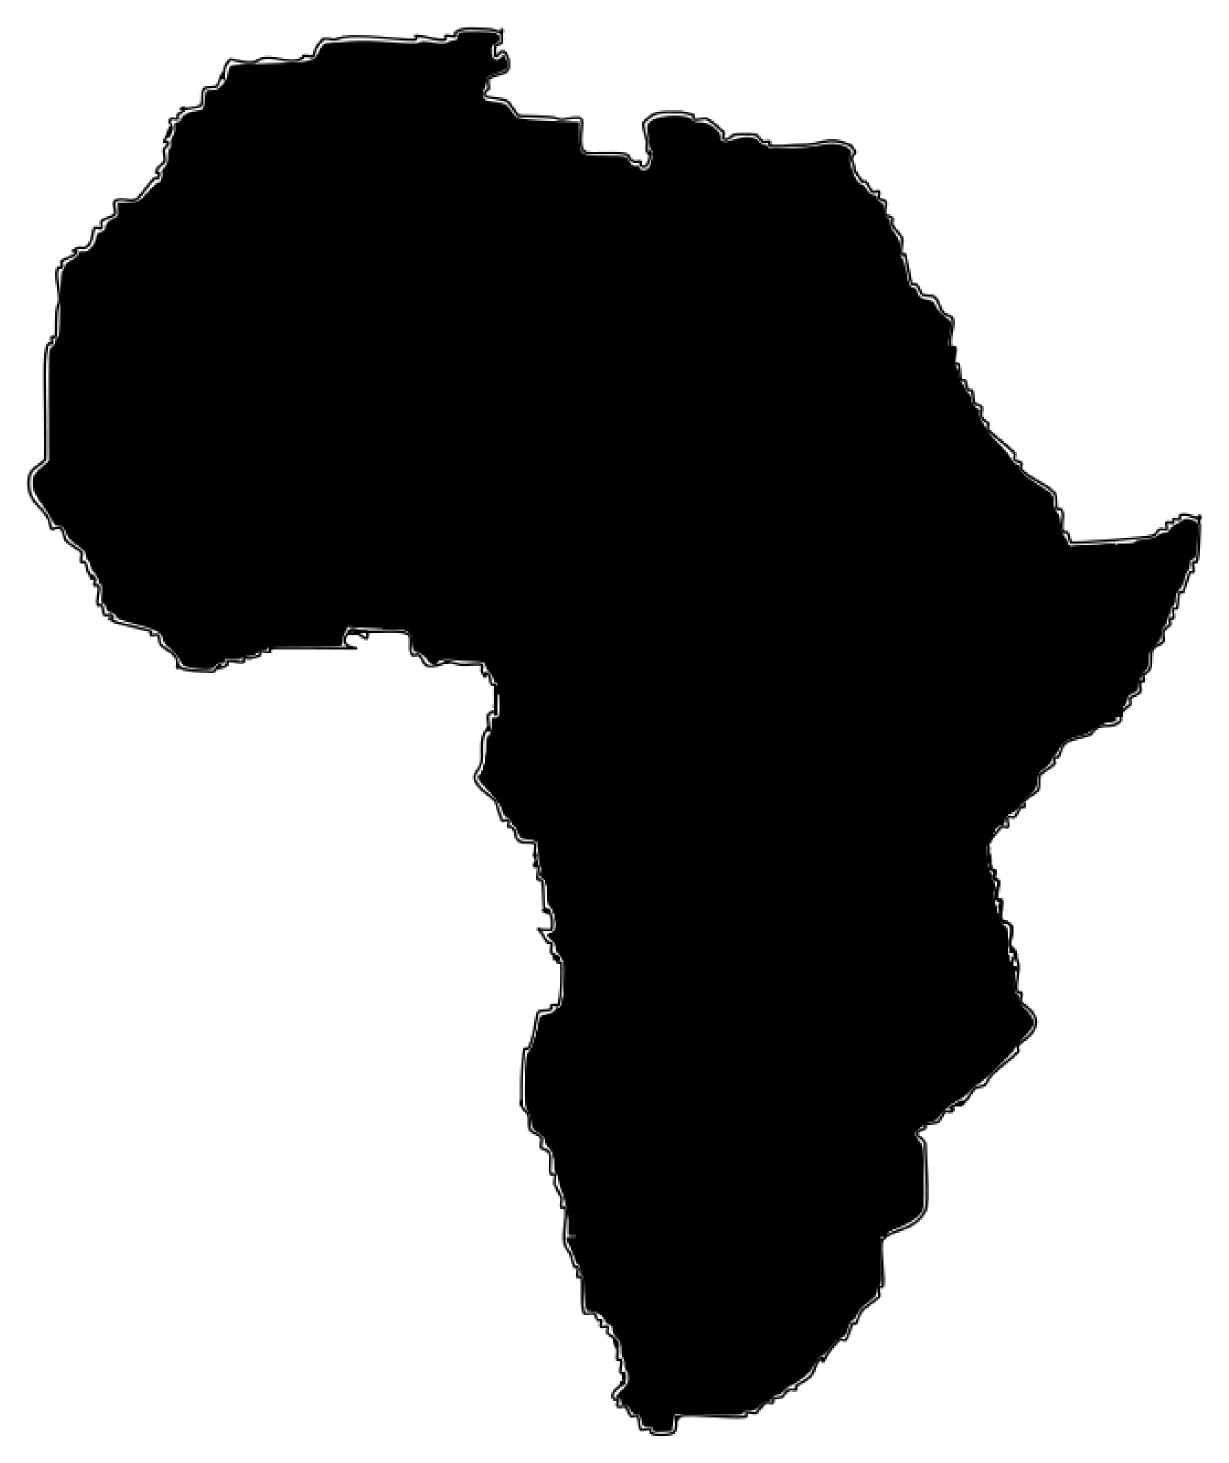 africa clipart - photo #11